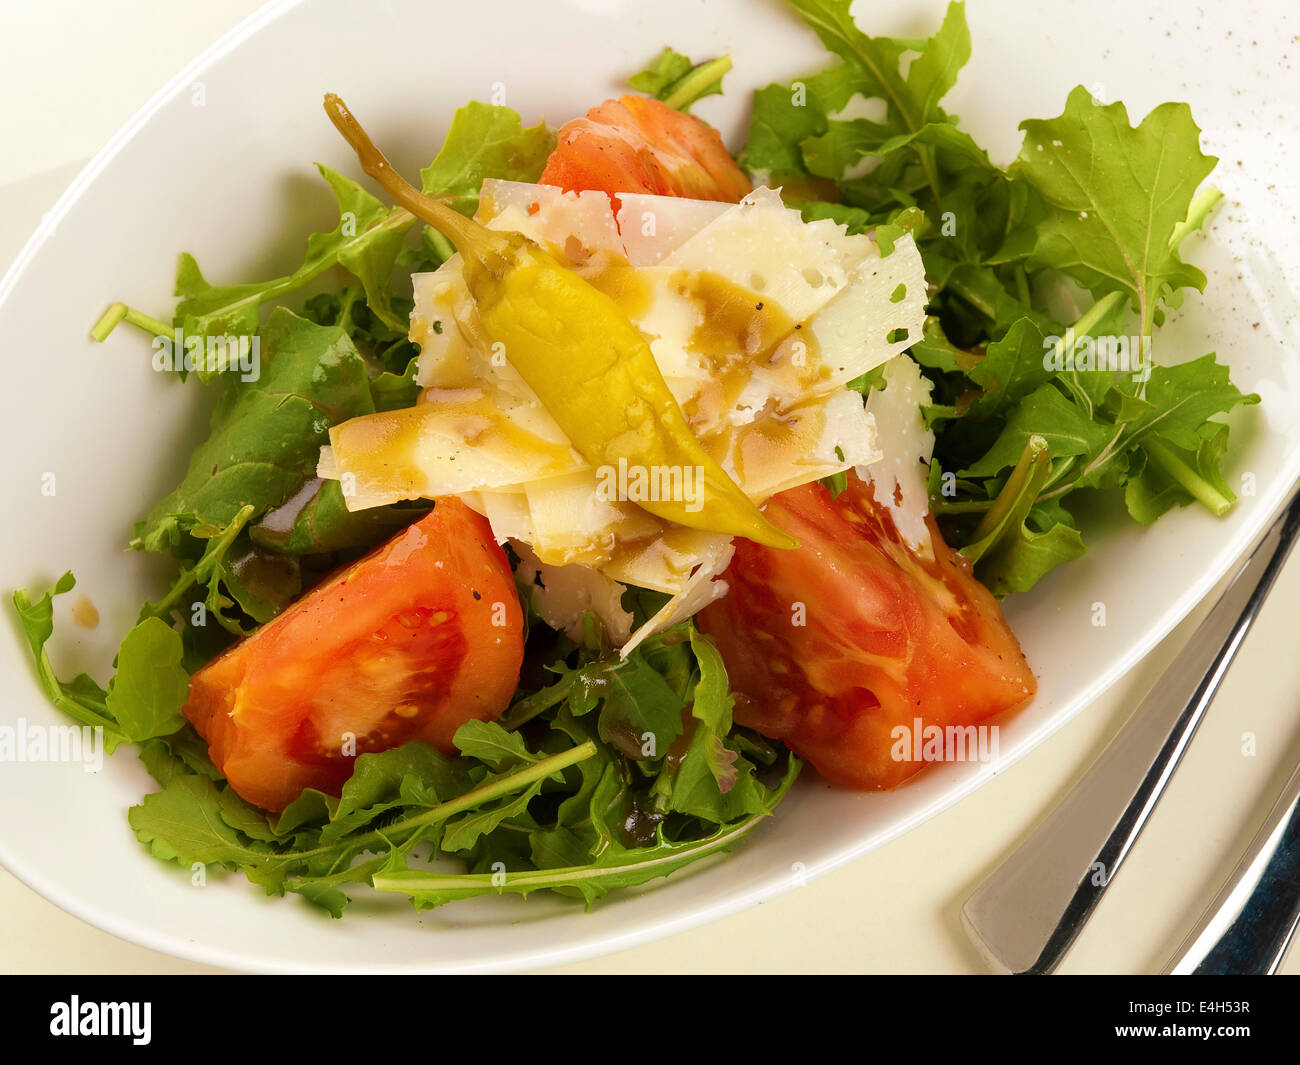 Rocket salad with tomato and Parmesan Stock Photo